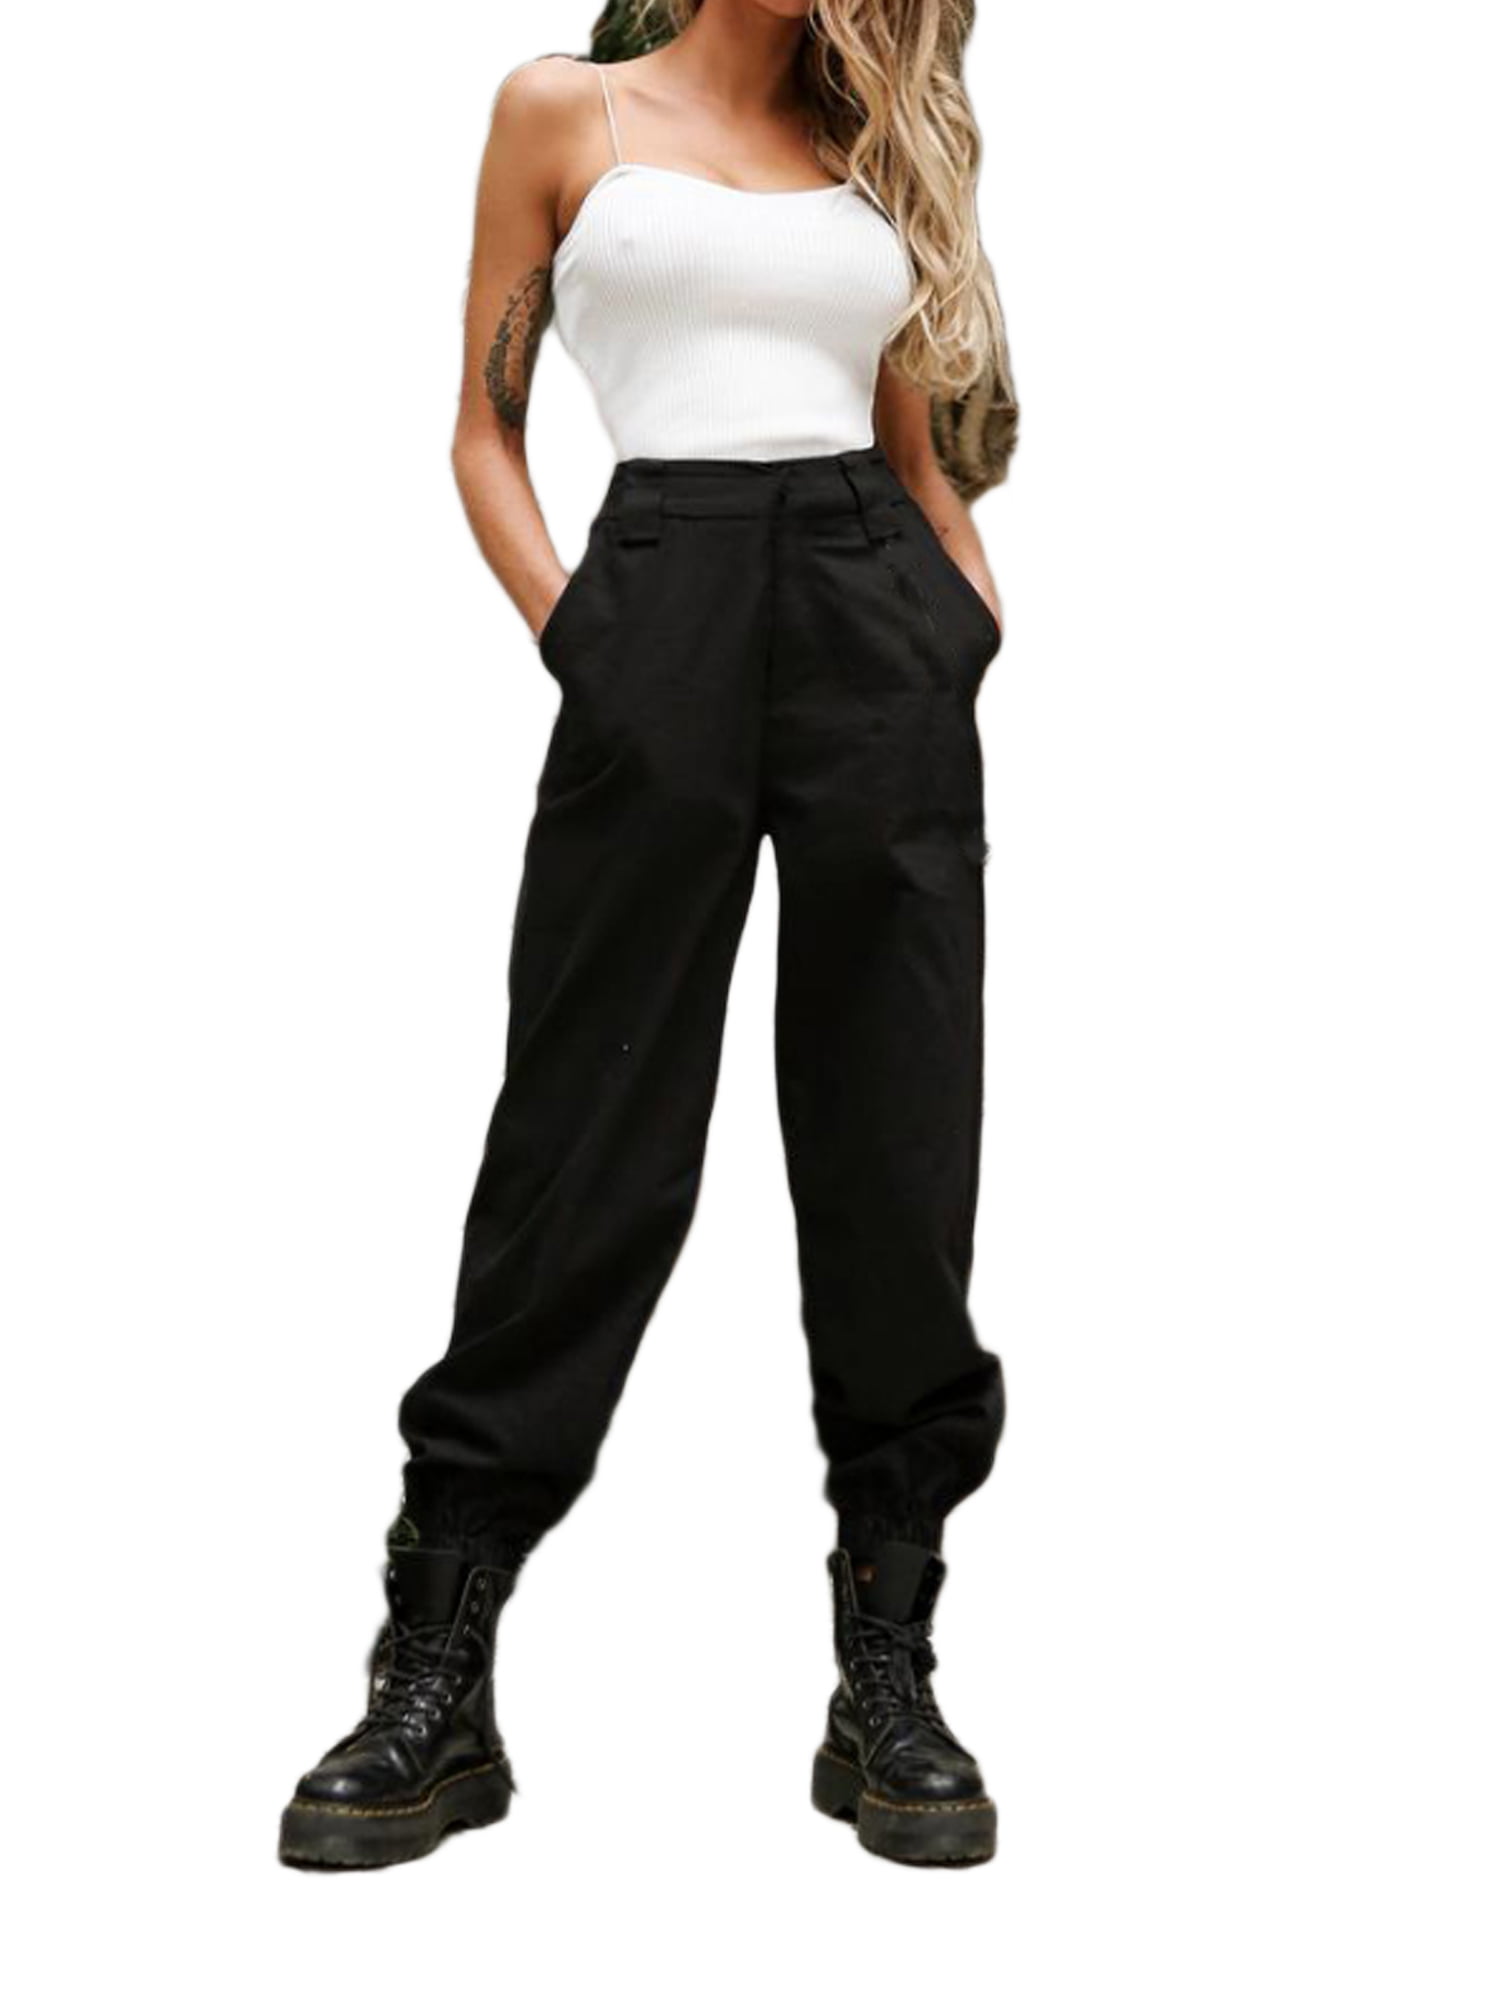 Army Cargo Pants Women - Army Military